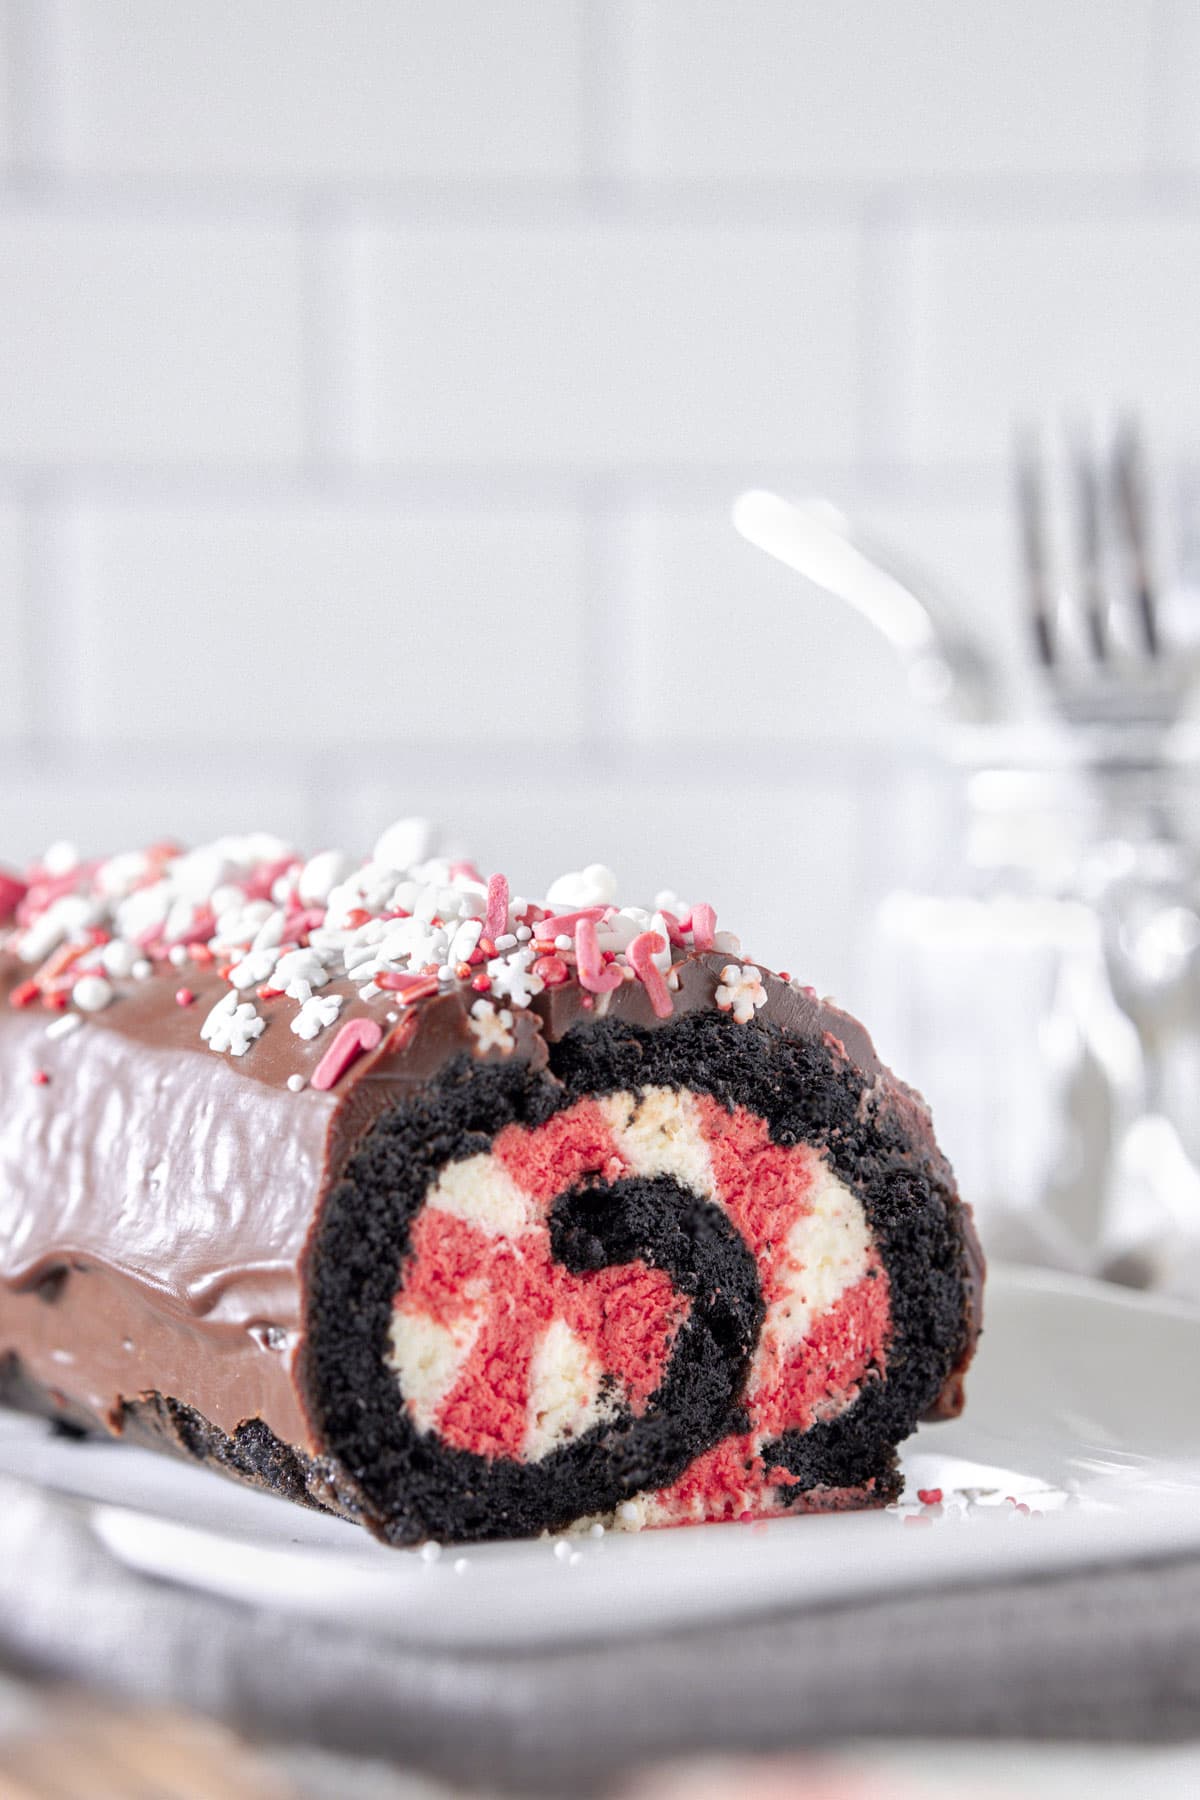 Chocolate Peppermint Swiss Roll filled with red and white cream, on a white plate